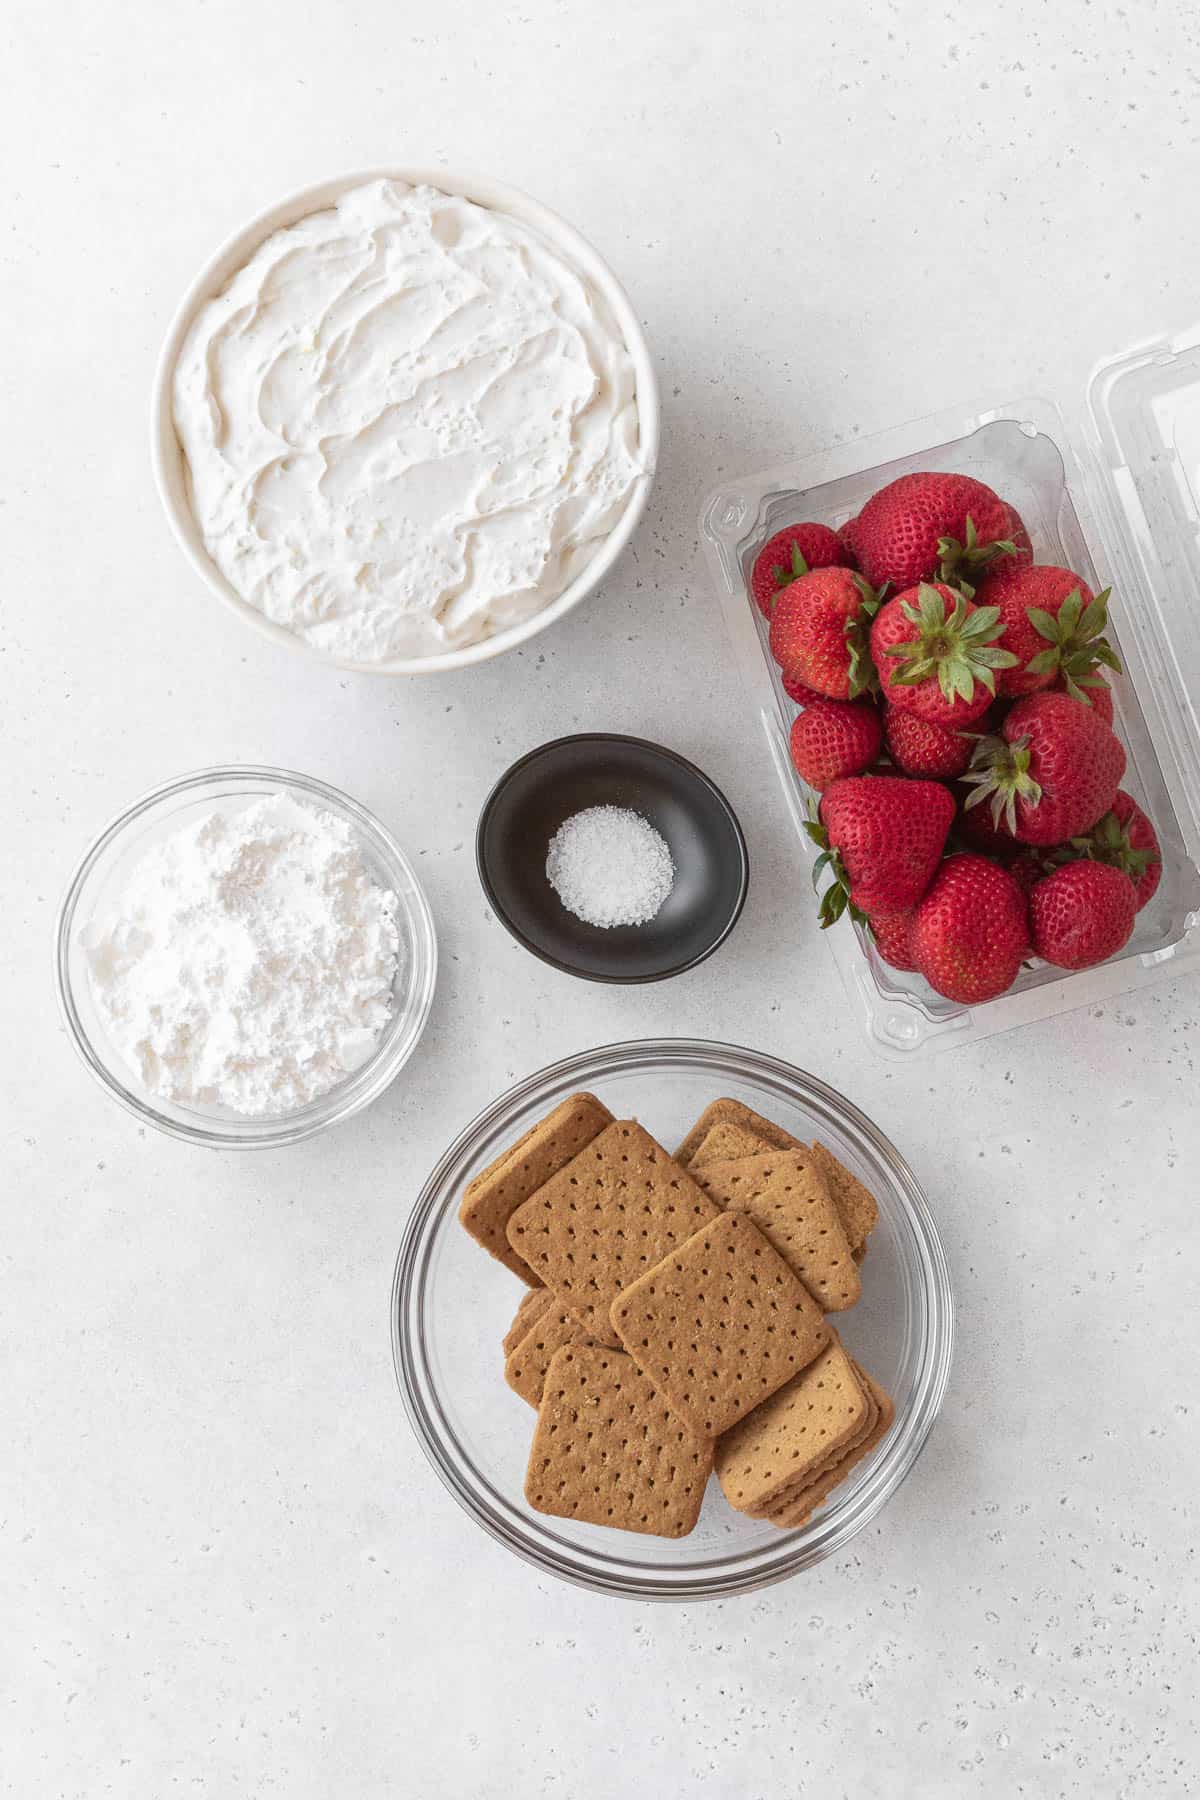 ingredients for strawberry cream cheese icebox cake measured out into bowls on a white table.